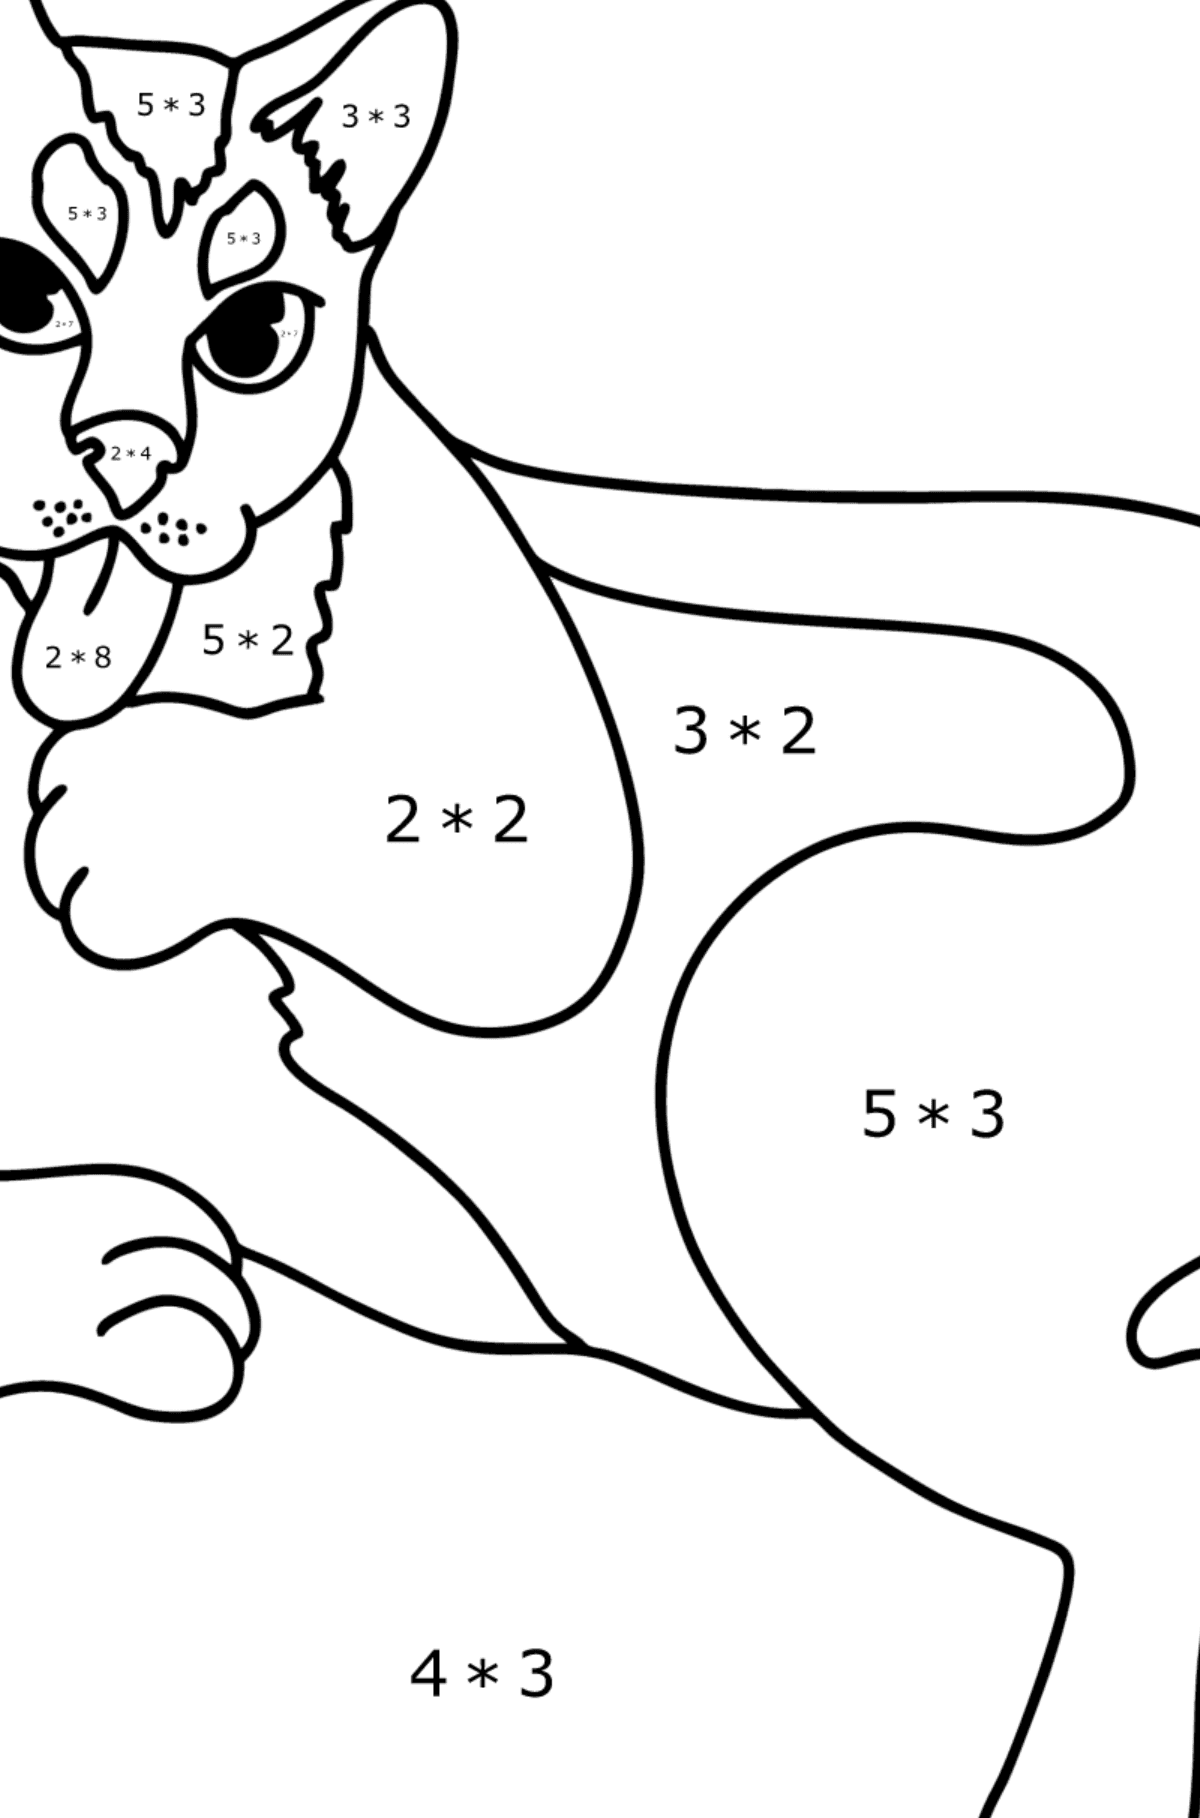 Black Cat coloring page - Math Coloring - Multiplication for Kids